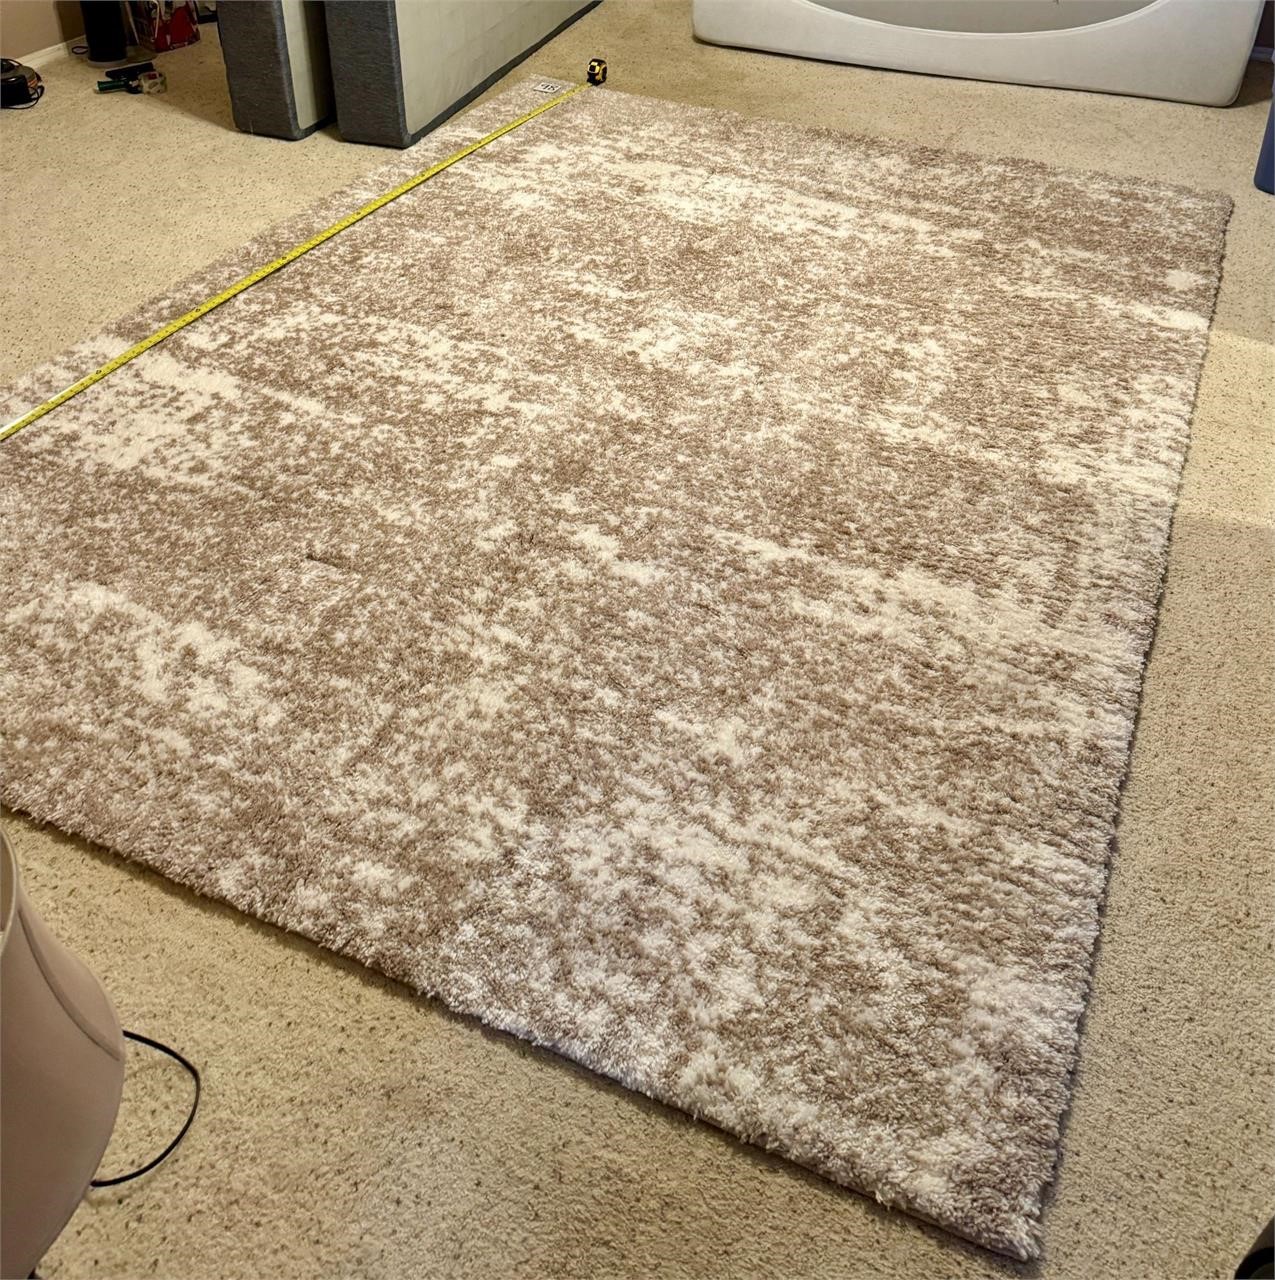 New Large Area Rug (Used for Staging House)